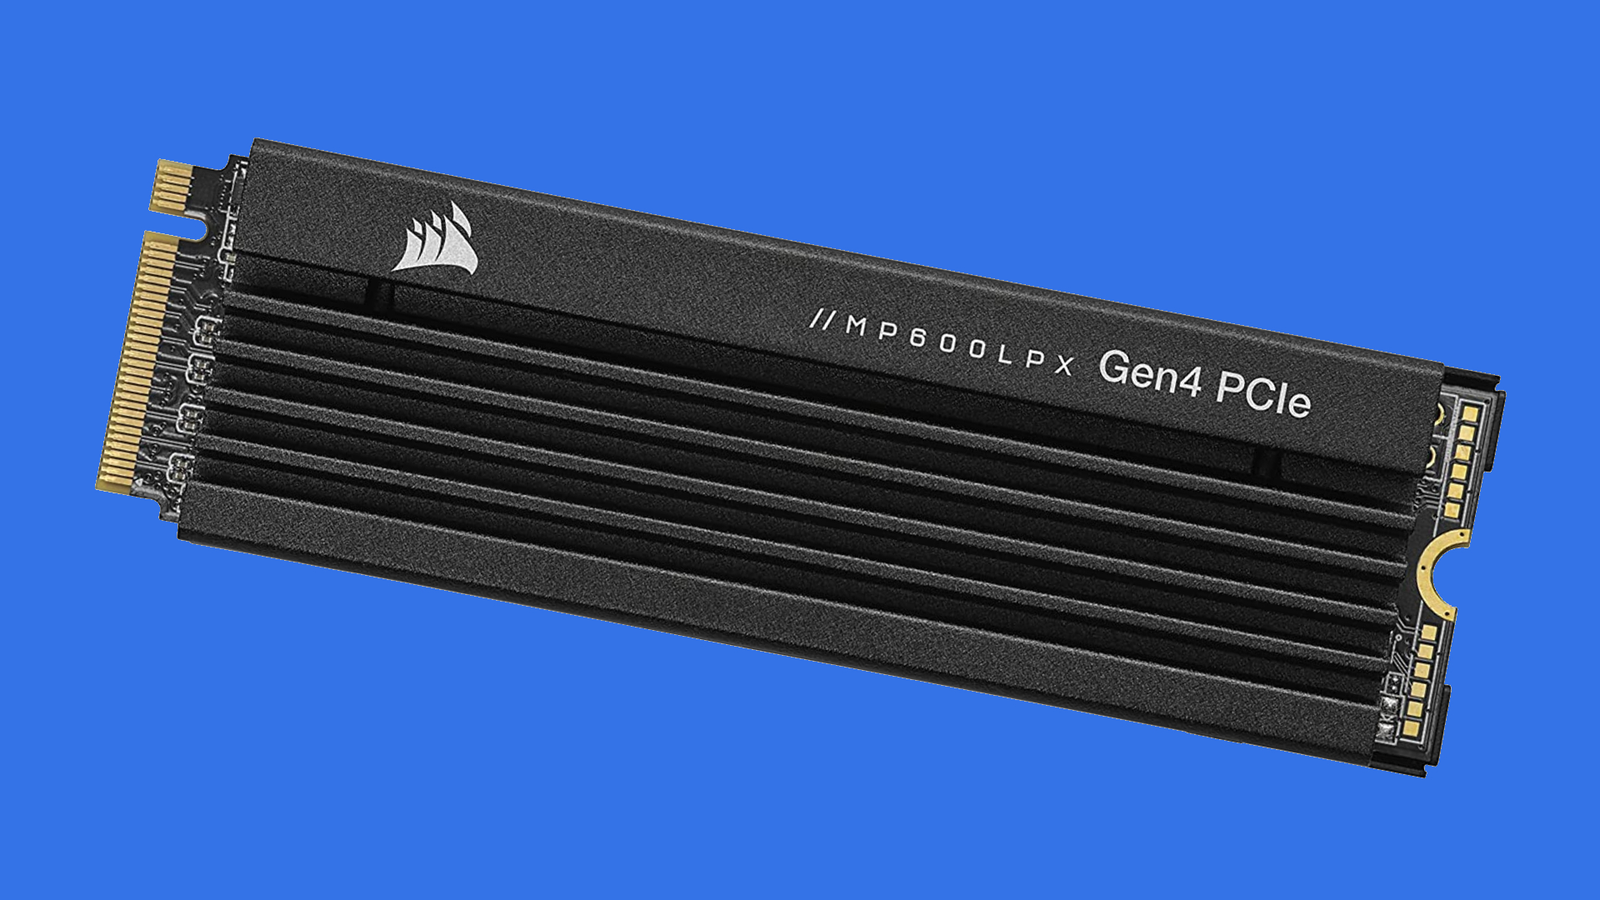 Corsair MP600 Pro LPX SSD Review: Another Day, Another Drive